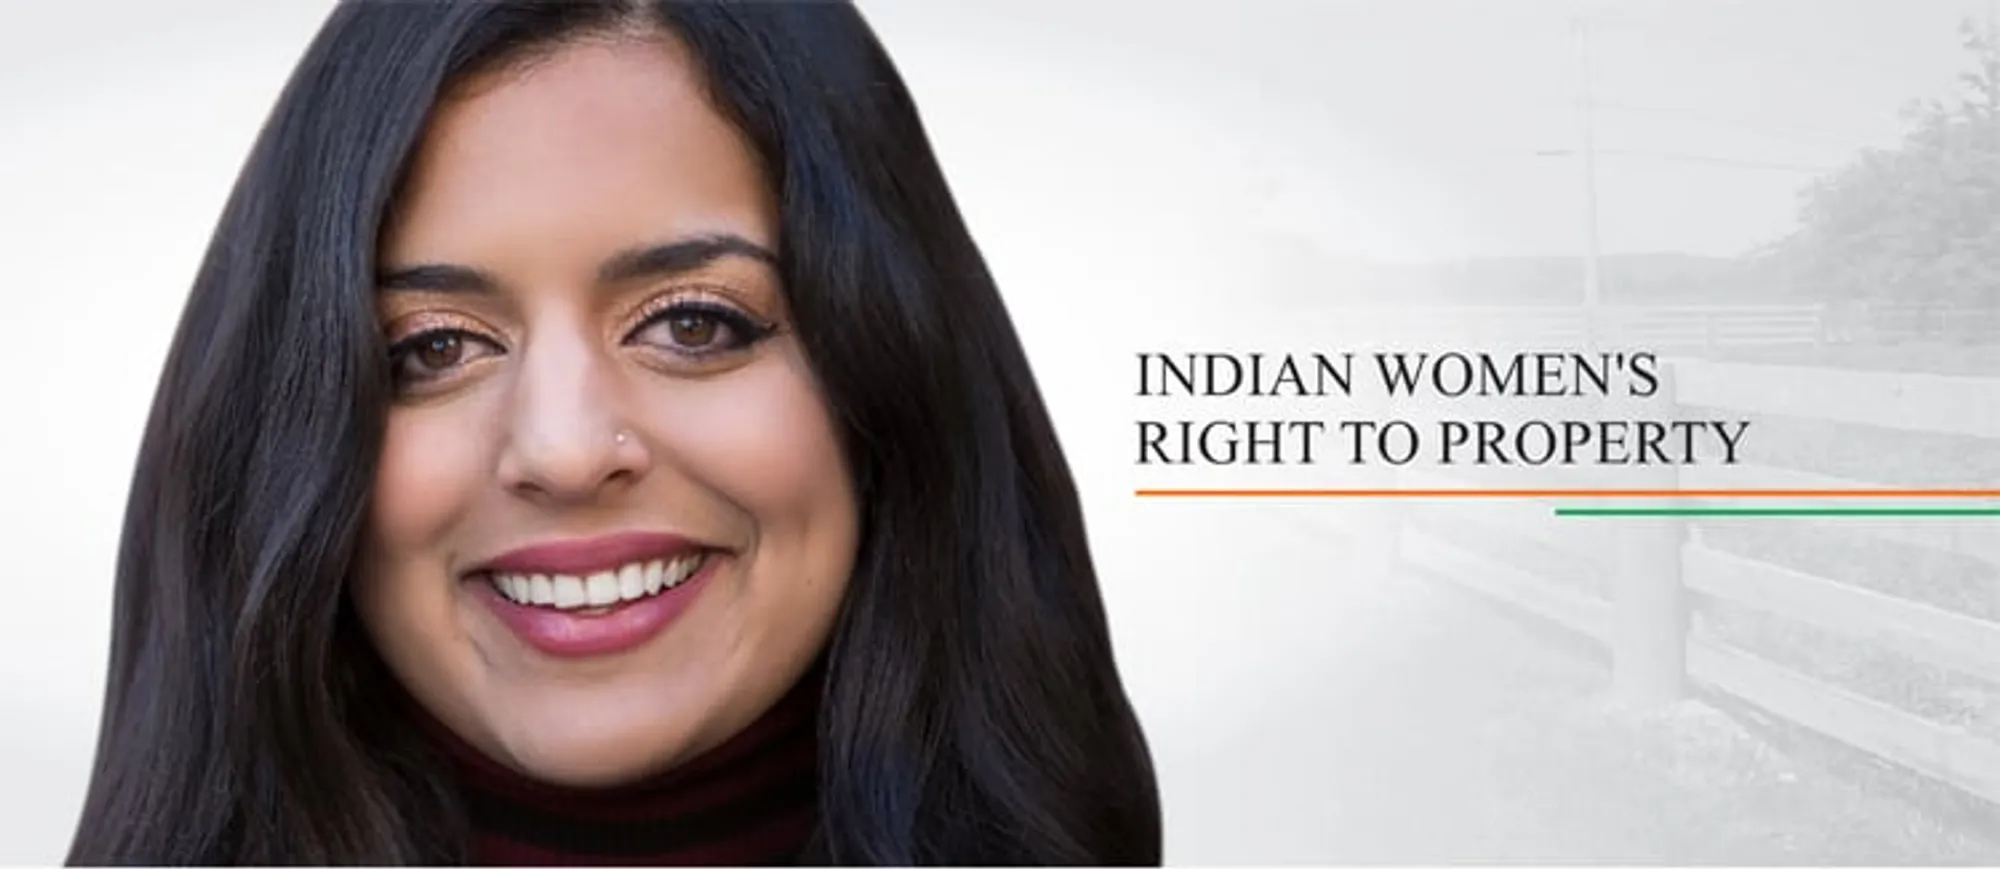 Indian Women's Right to Property